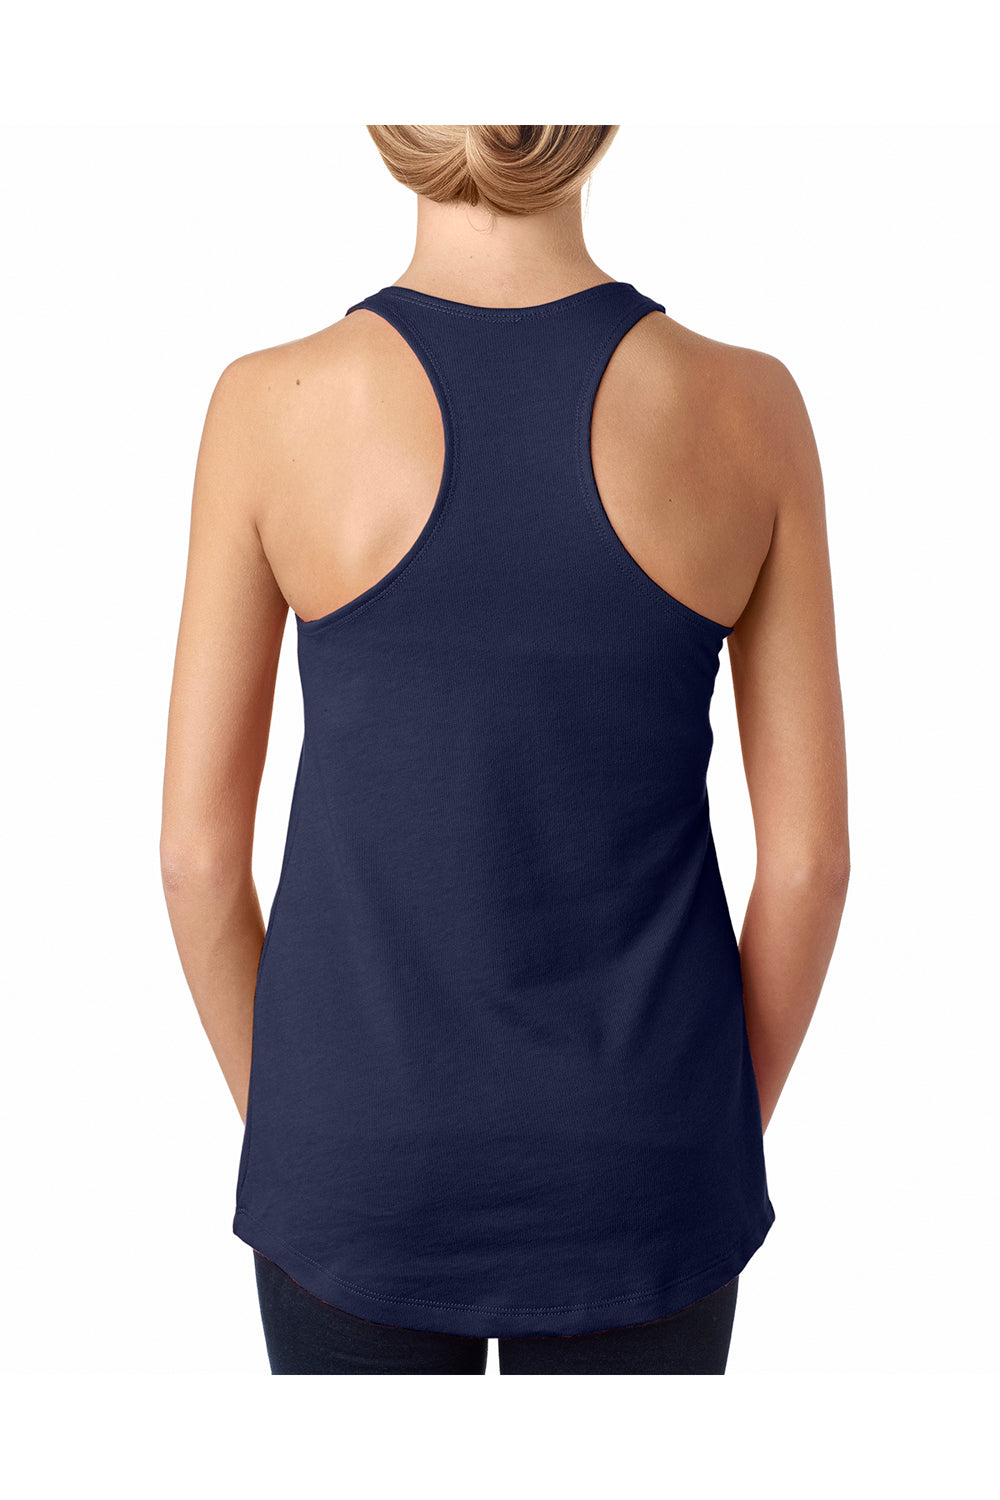 Next Level 6933 Womens French Terry Tank Top Navy Blue Back